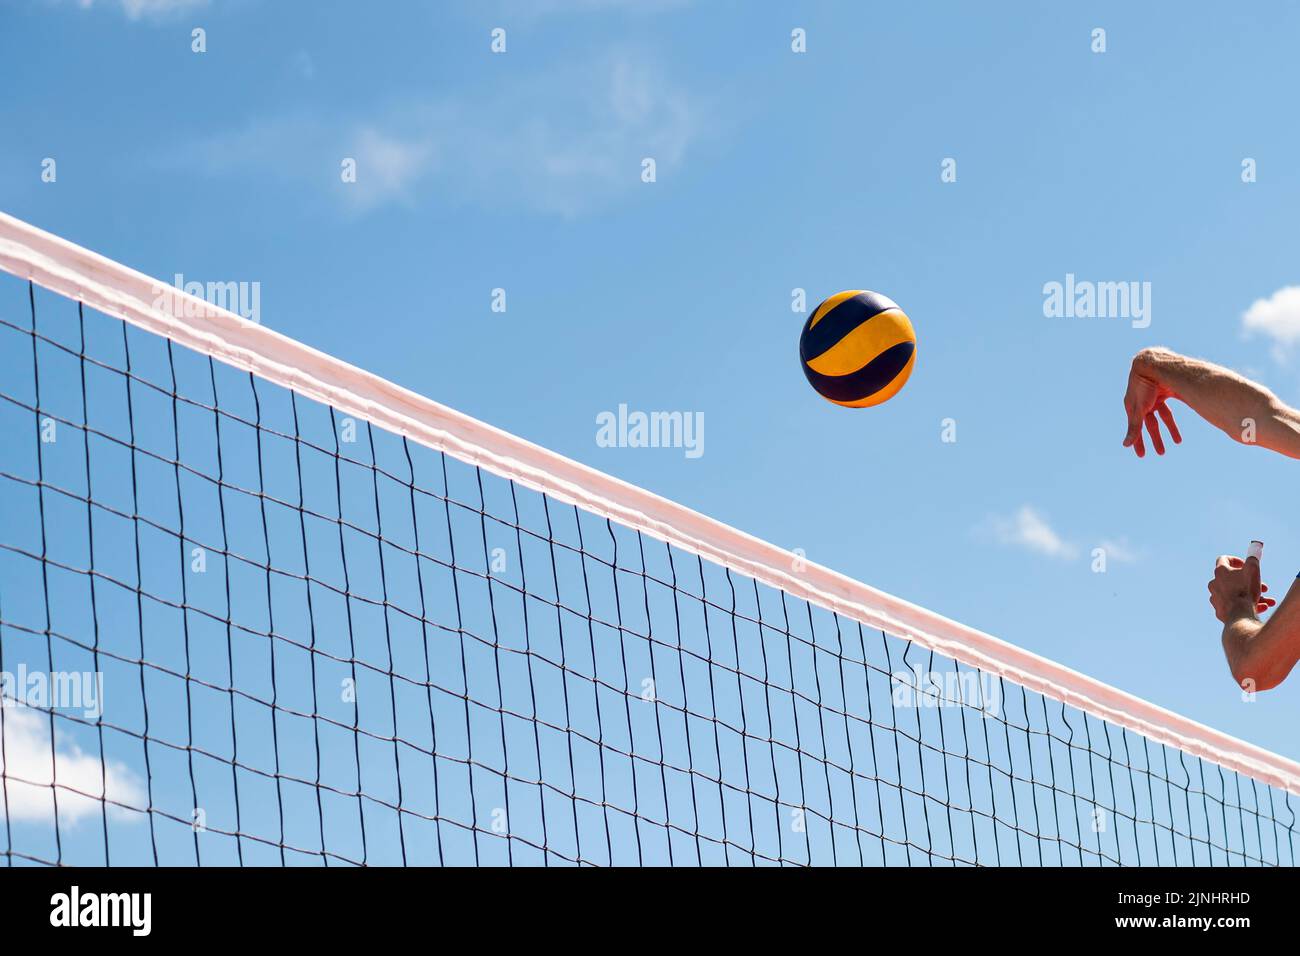 Volleyball flying through air with hands visible against the background of a blue sky with clouds Stock Photo